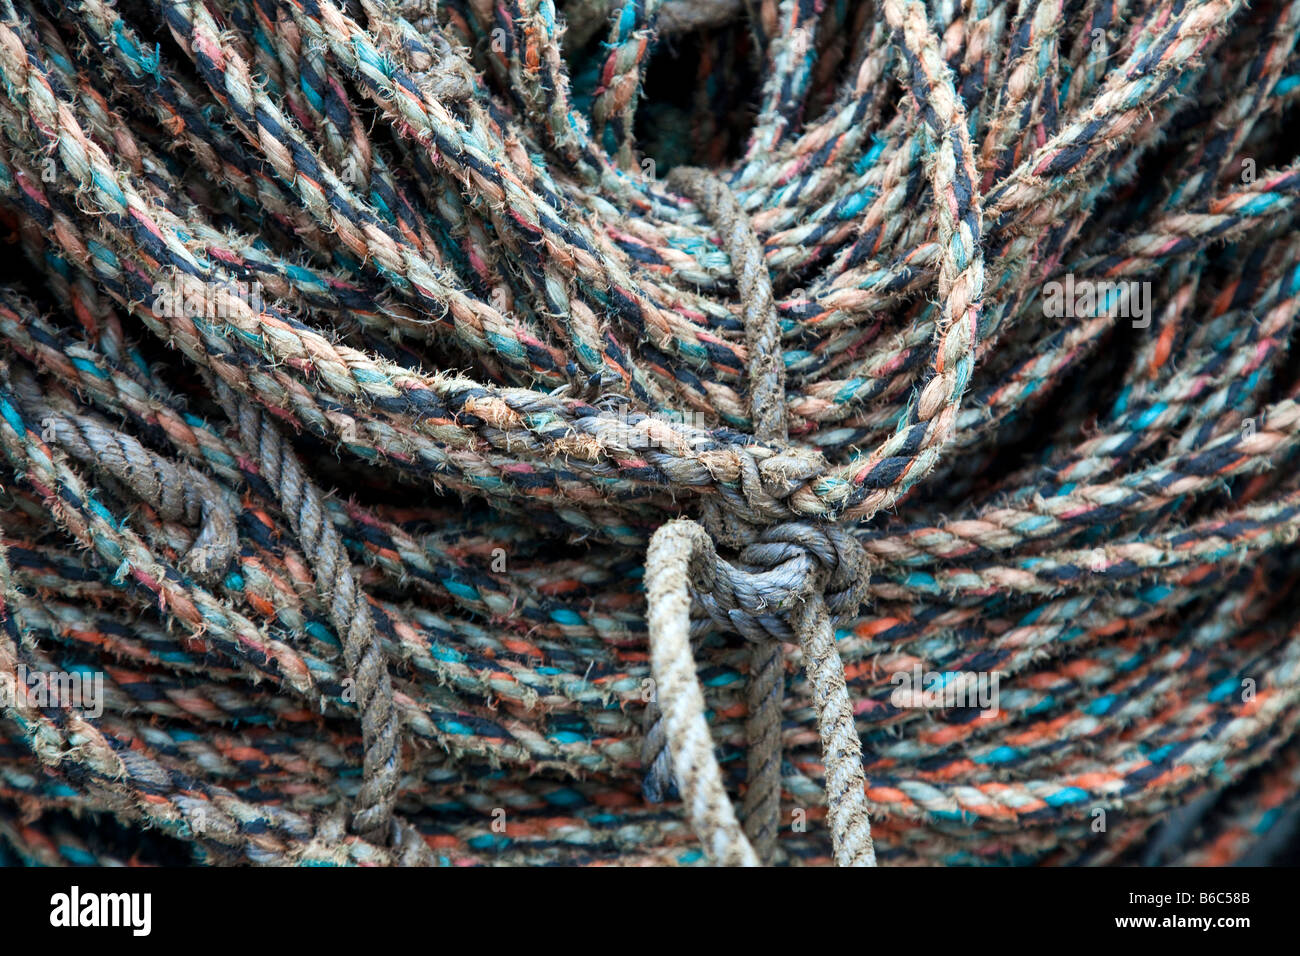 A coil of rope used by fishermen in the North yorkshire village of Staithes England UK Stock Photo